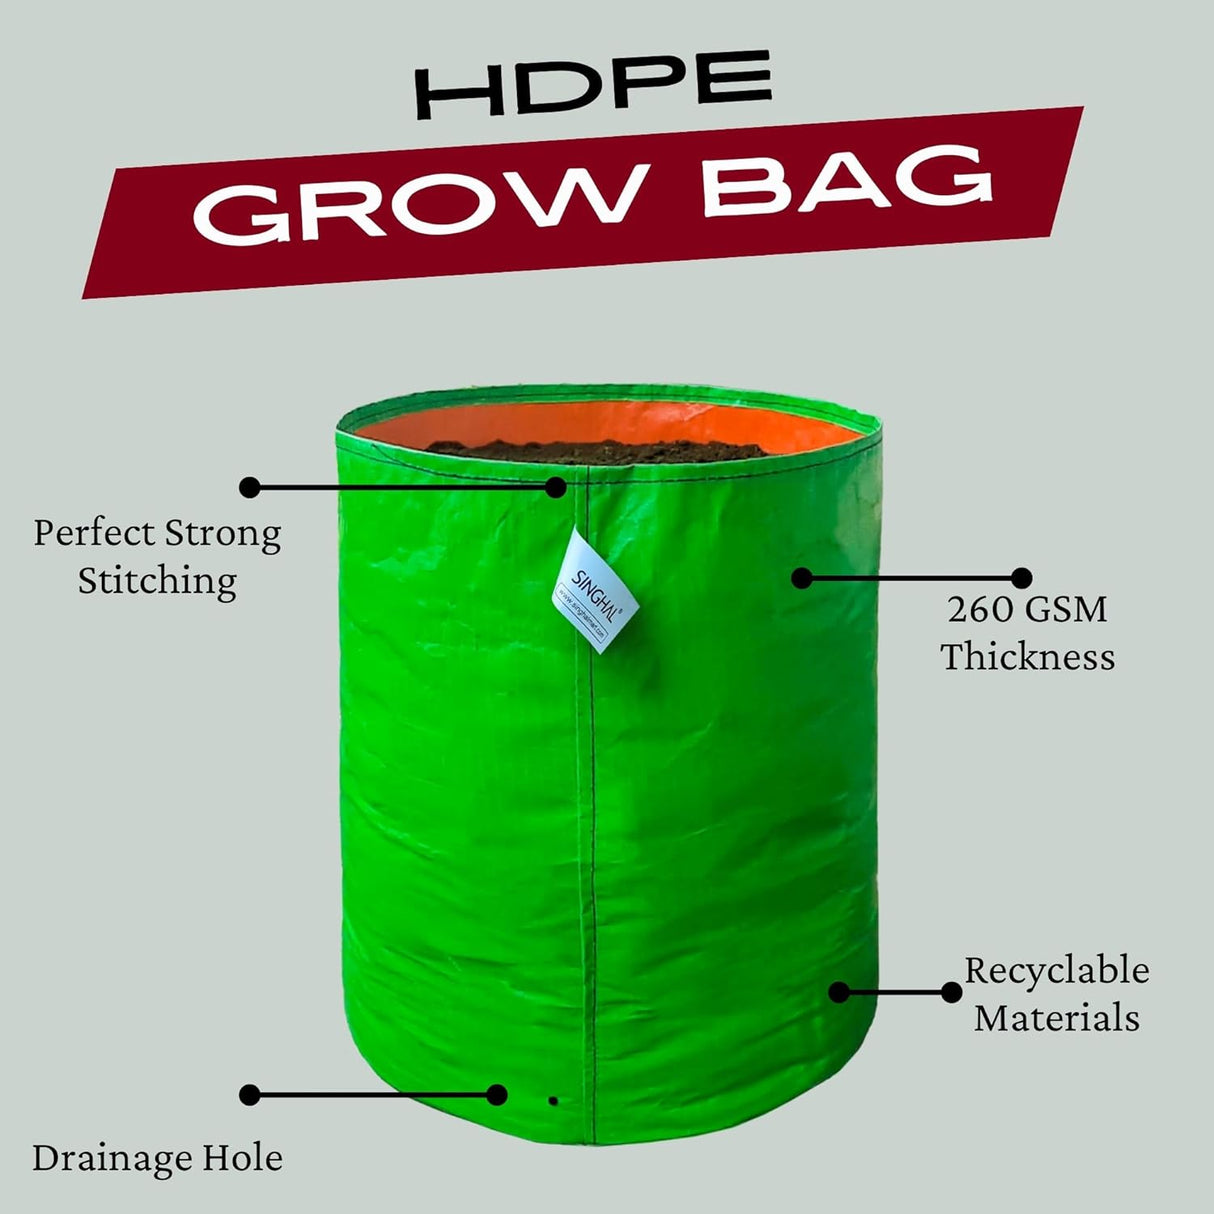 SINGHAL 24x24 inch Grow Bags Pack of 10 for Home Gardening, HDPE Plants Bag for Fruits, Vegetables Flowers, 260 GSM Grow Bag, UV Protected